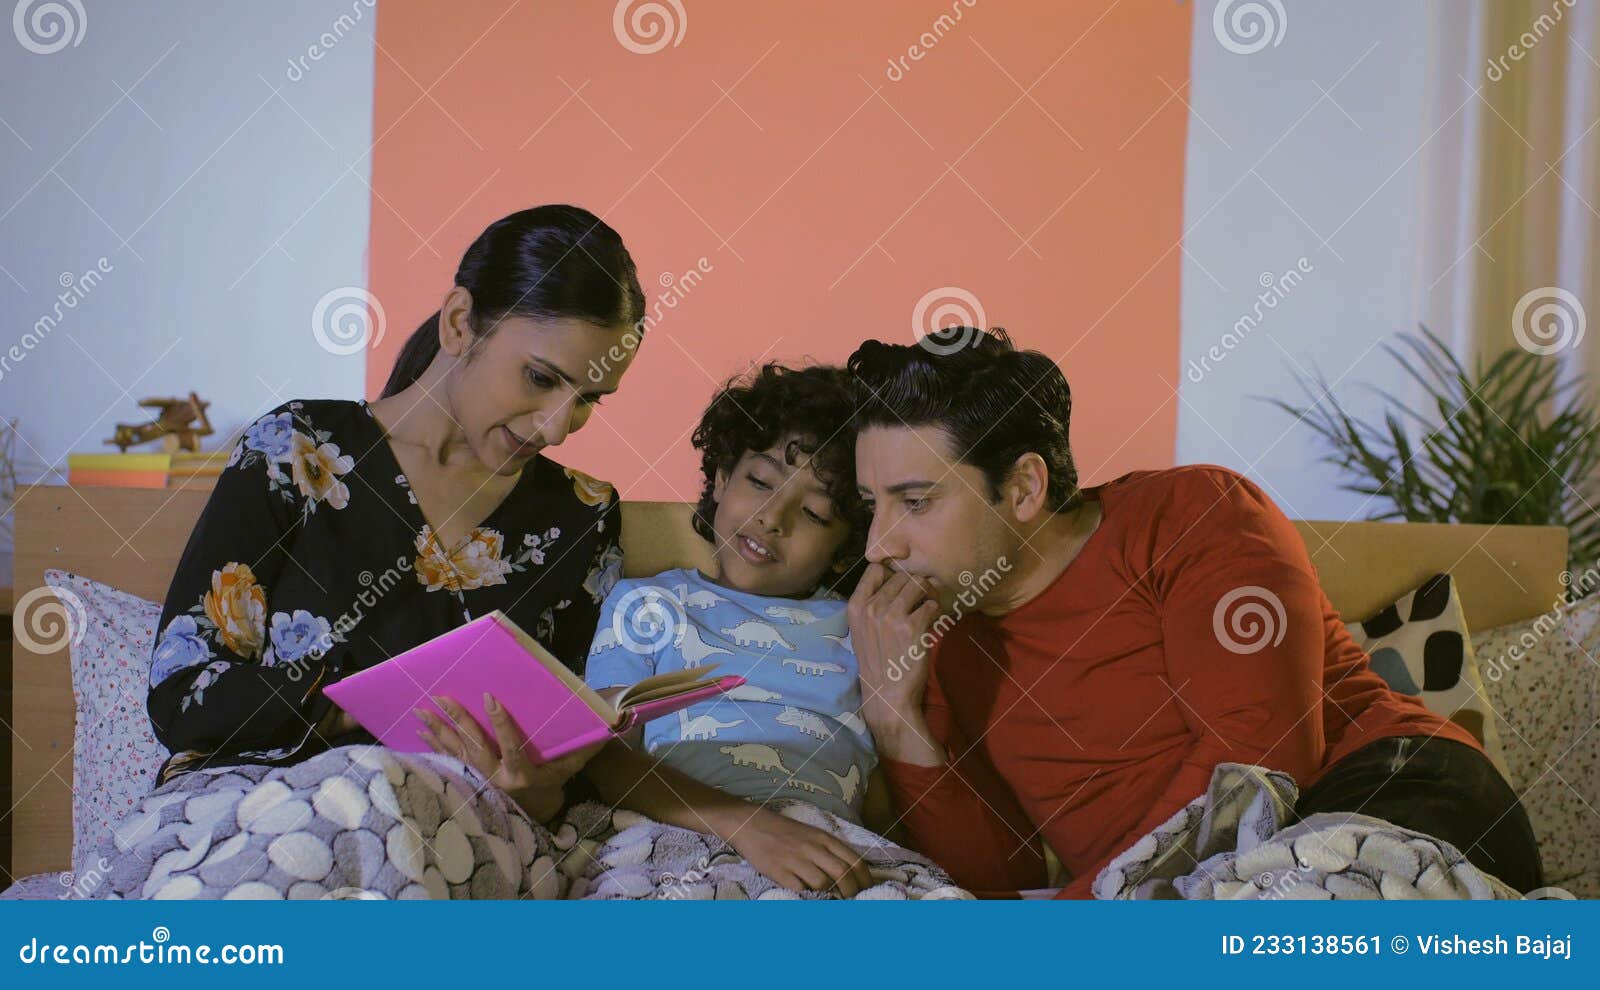 A Cheerful Indian Mother Telling a Bedtime Story To Her Adorable Child ...